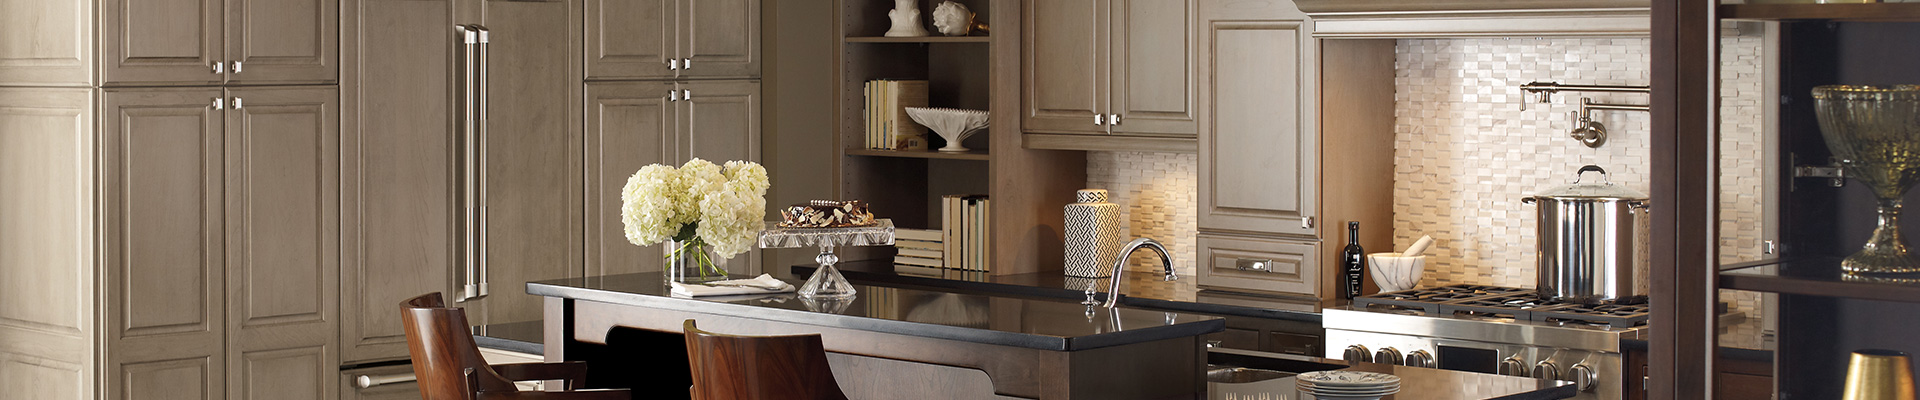 Omega kitchen cabinetry